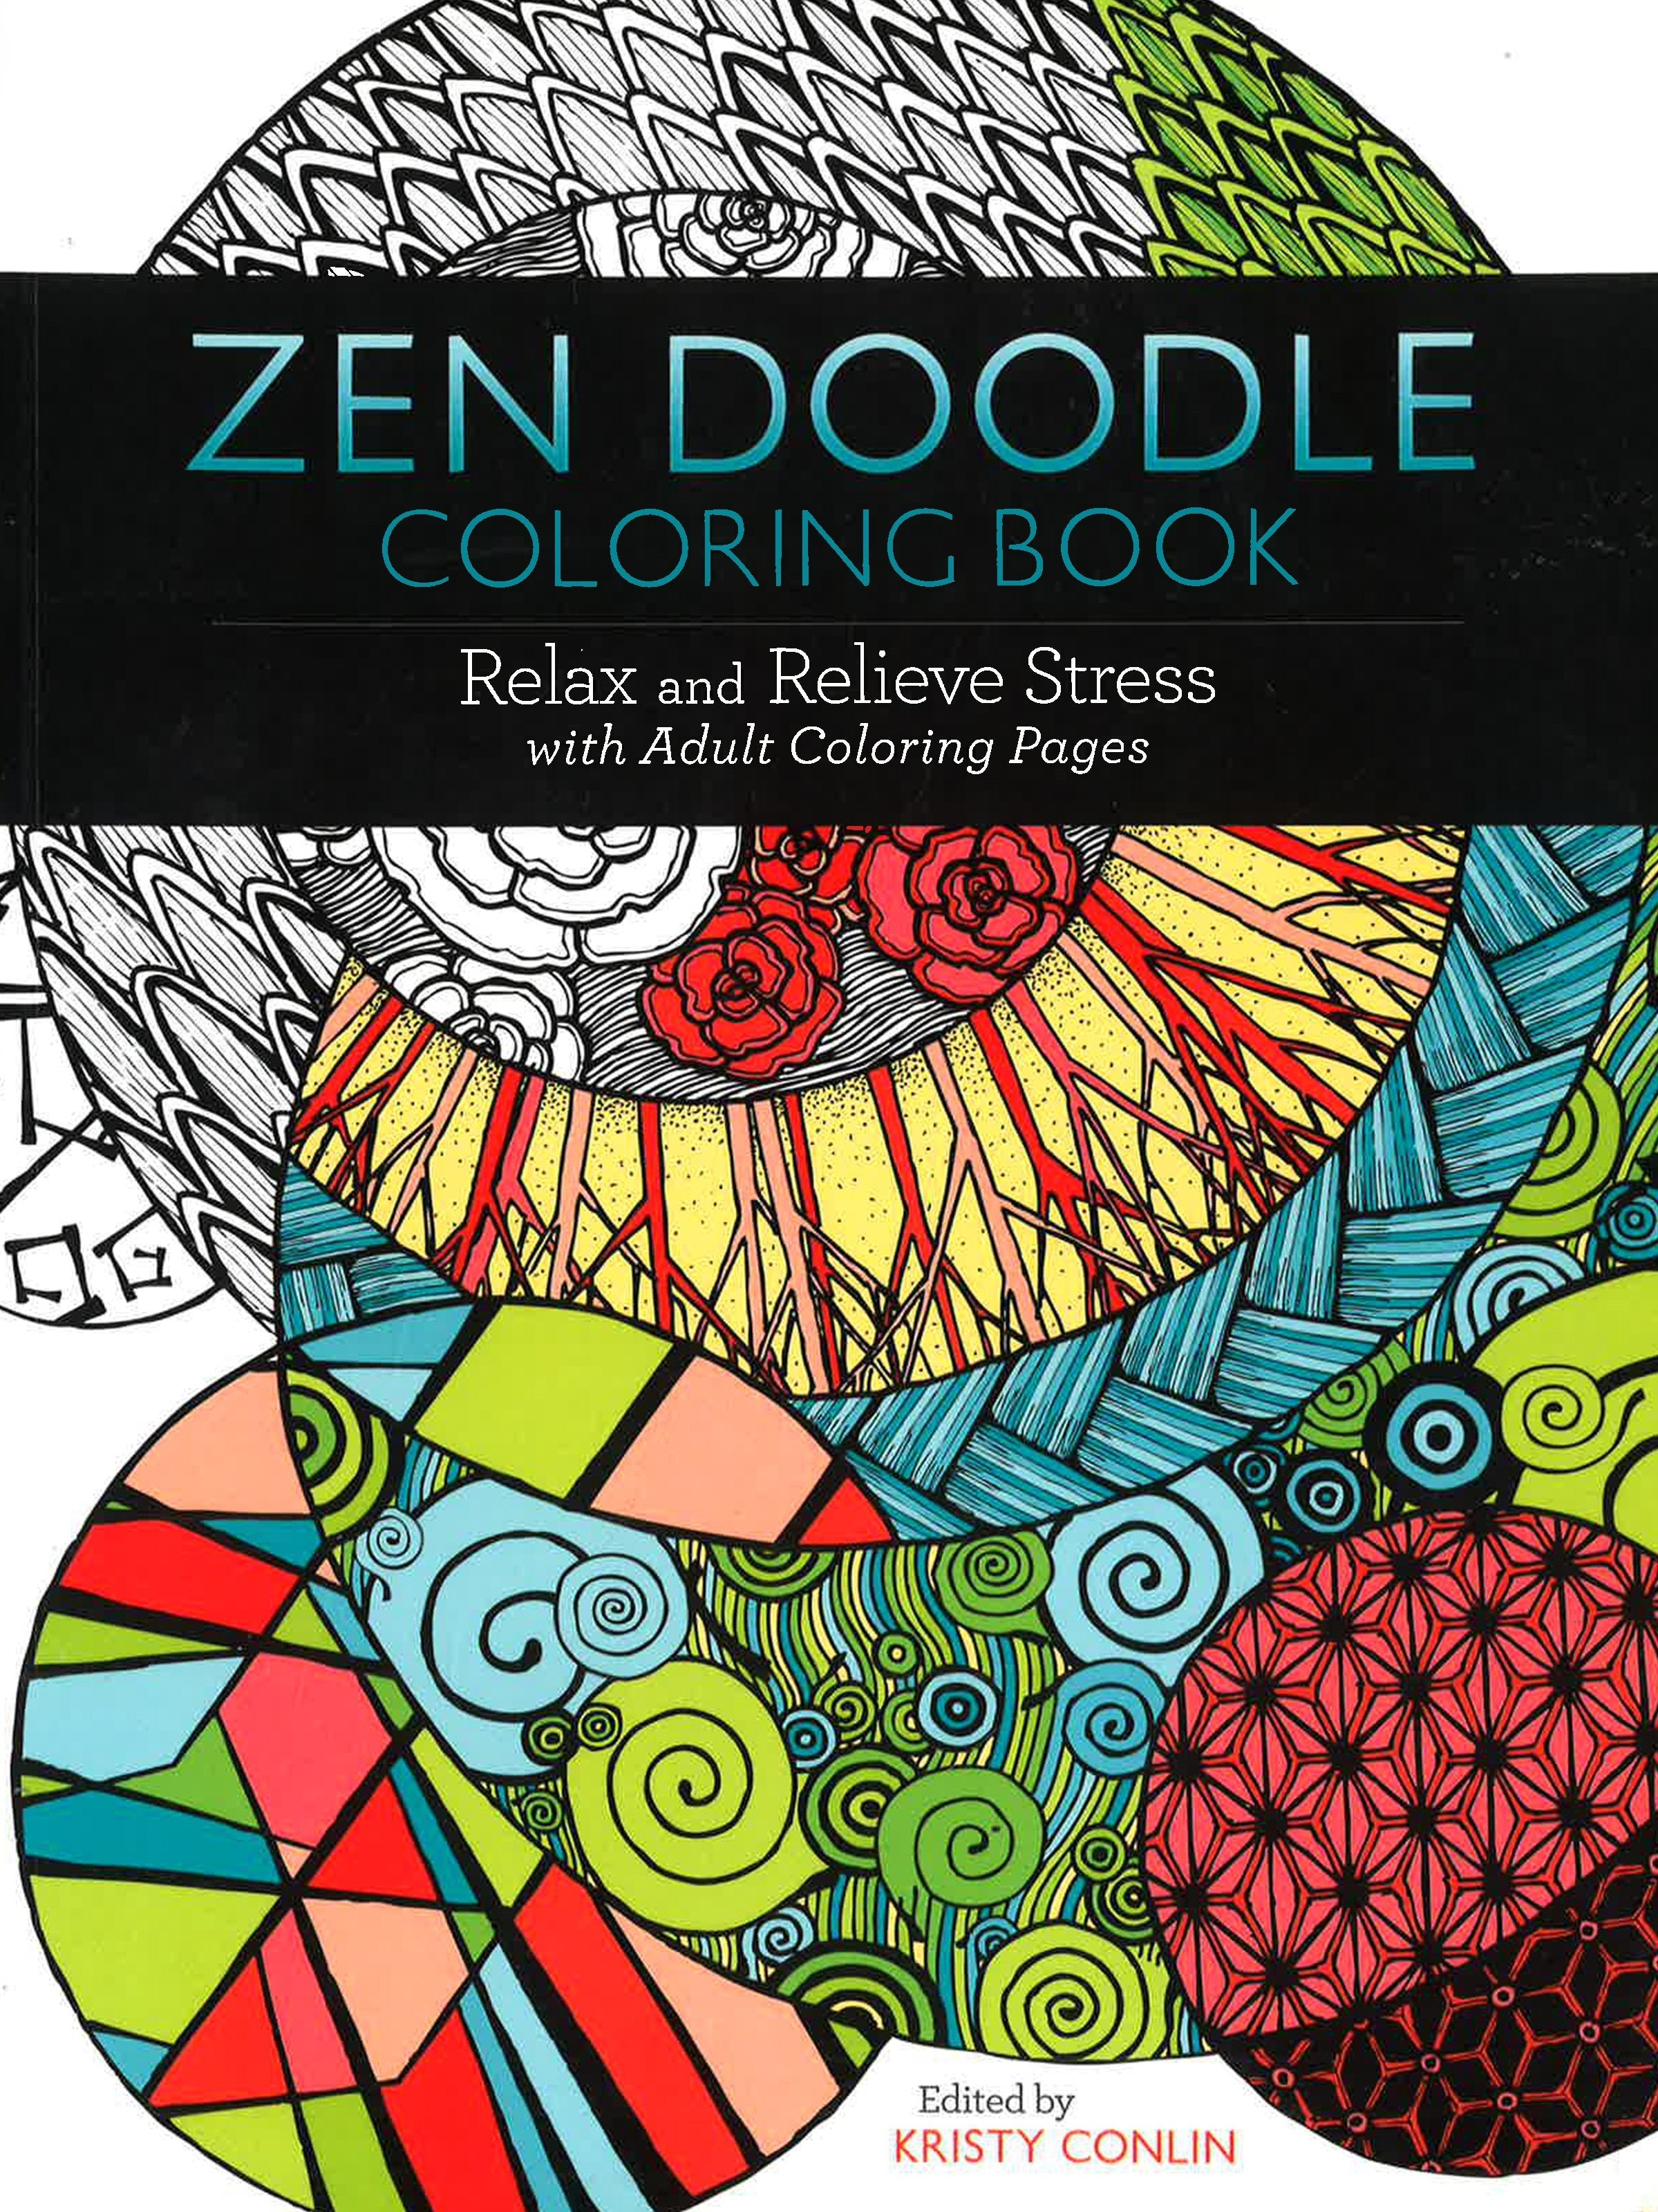 Cra-Z-Art on X: Coloring as an adult helps reduce stress and anxiety and  helps keep you focused. Take a mindfulness break with our adult coloring  books and colored pencils, and remembercolor in